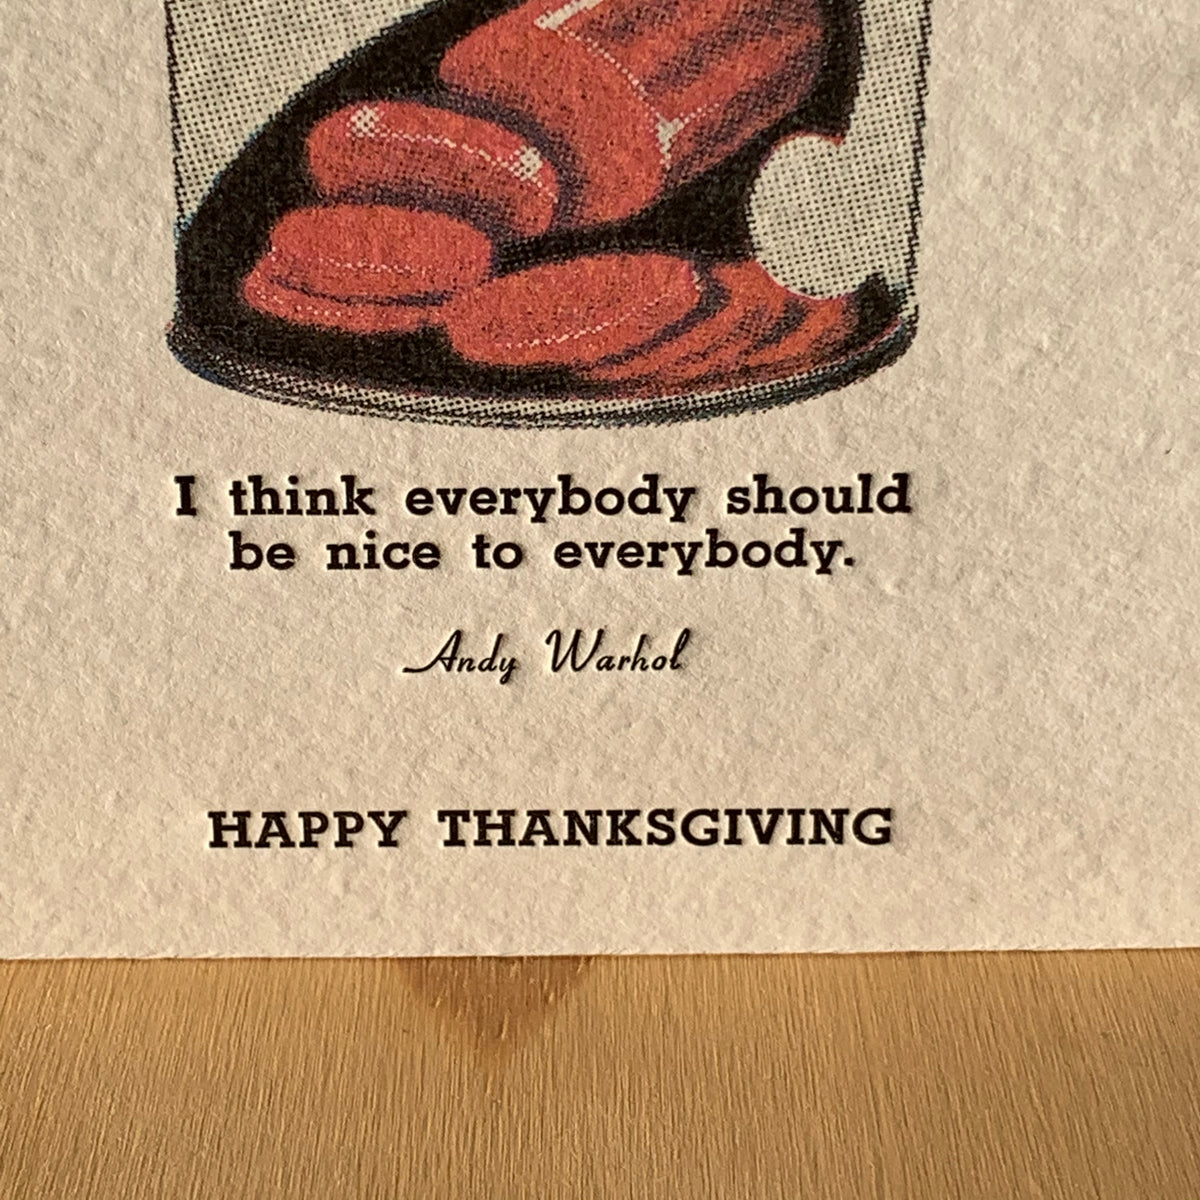 Andy Warhol Cranberry Sauce Thanksgiving